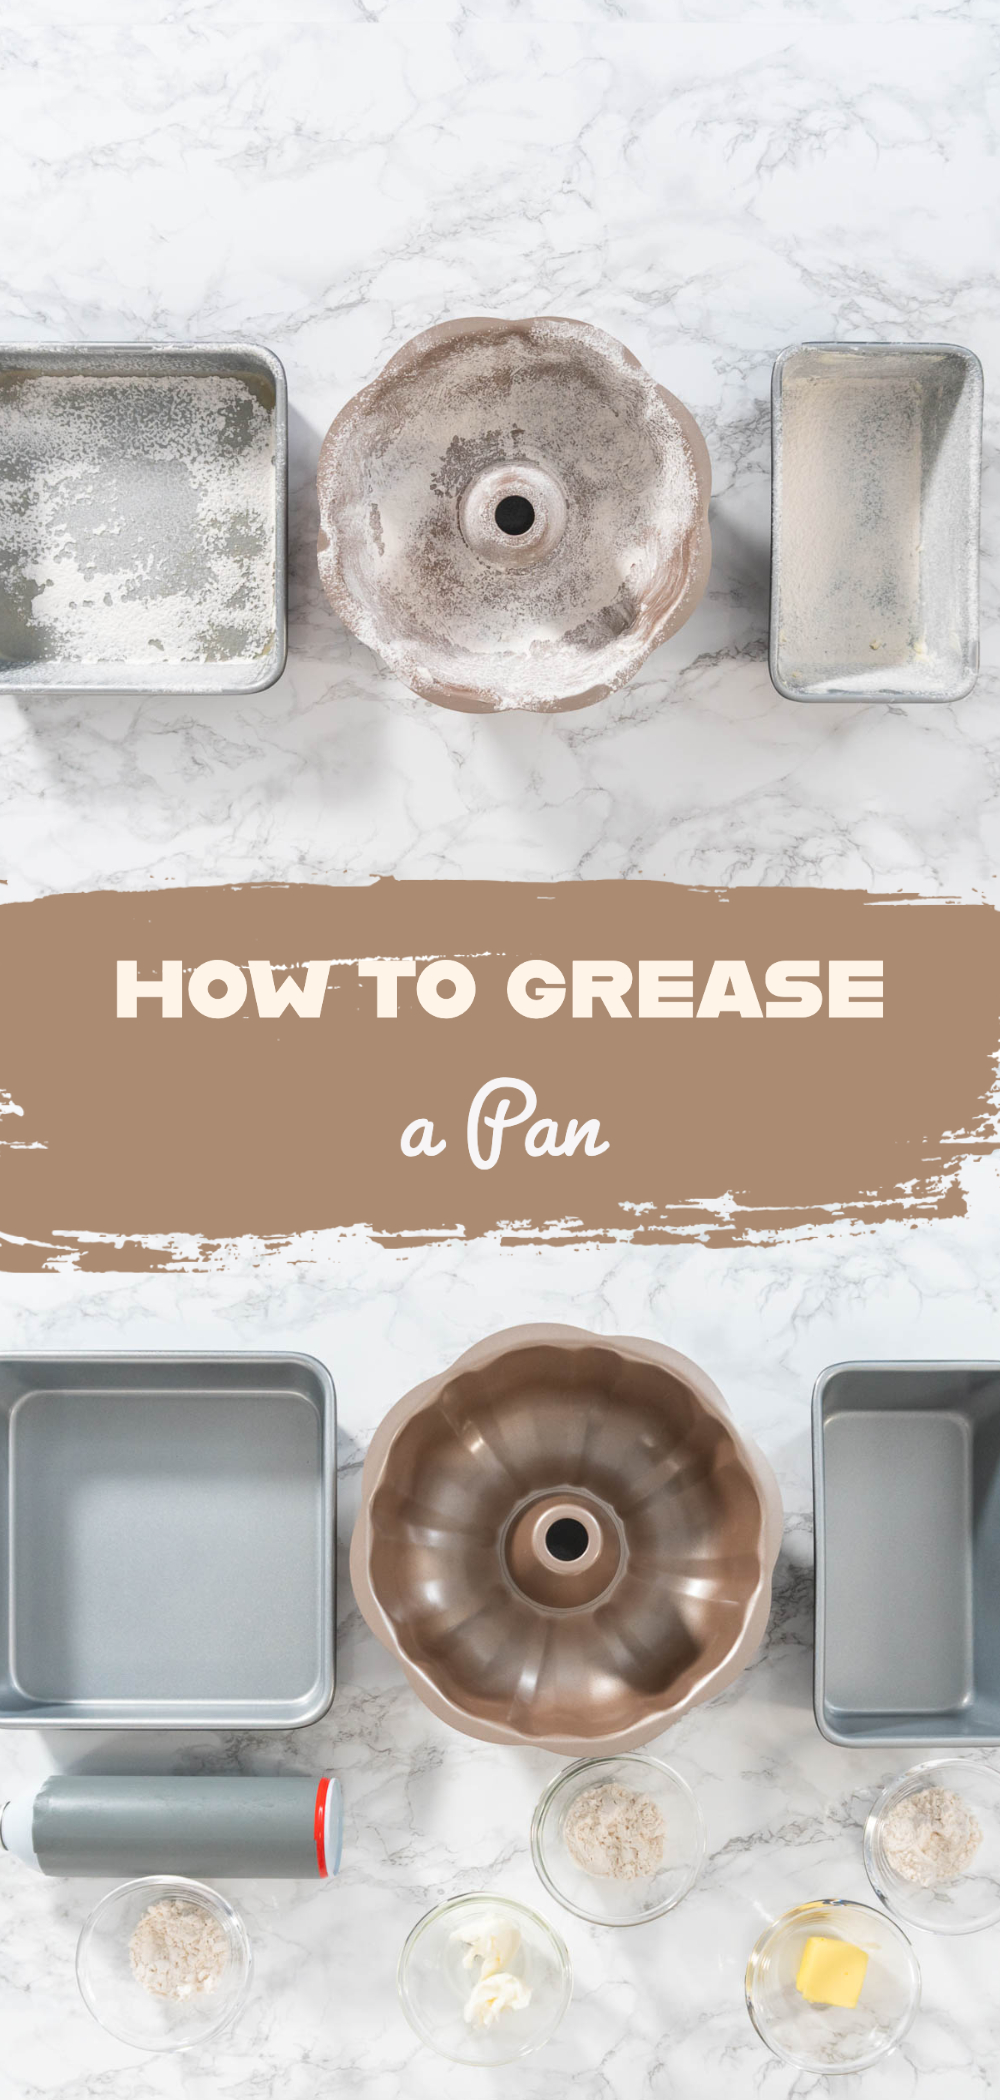 How to Grease a Pan